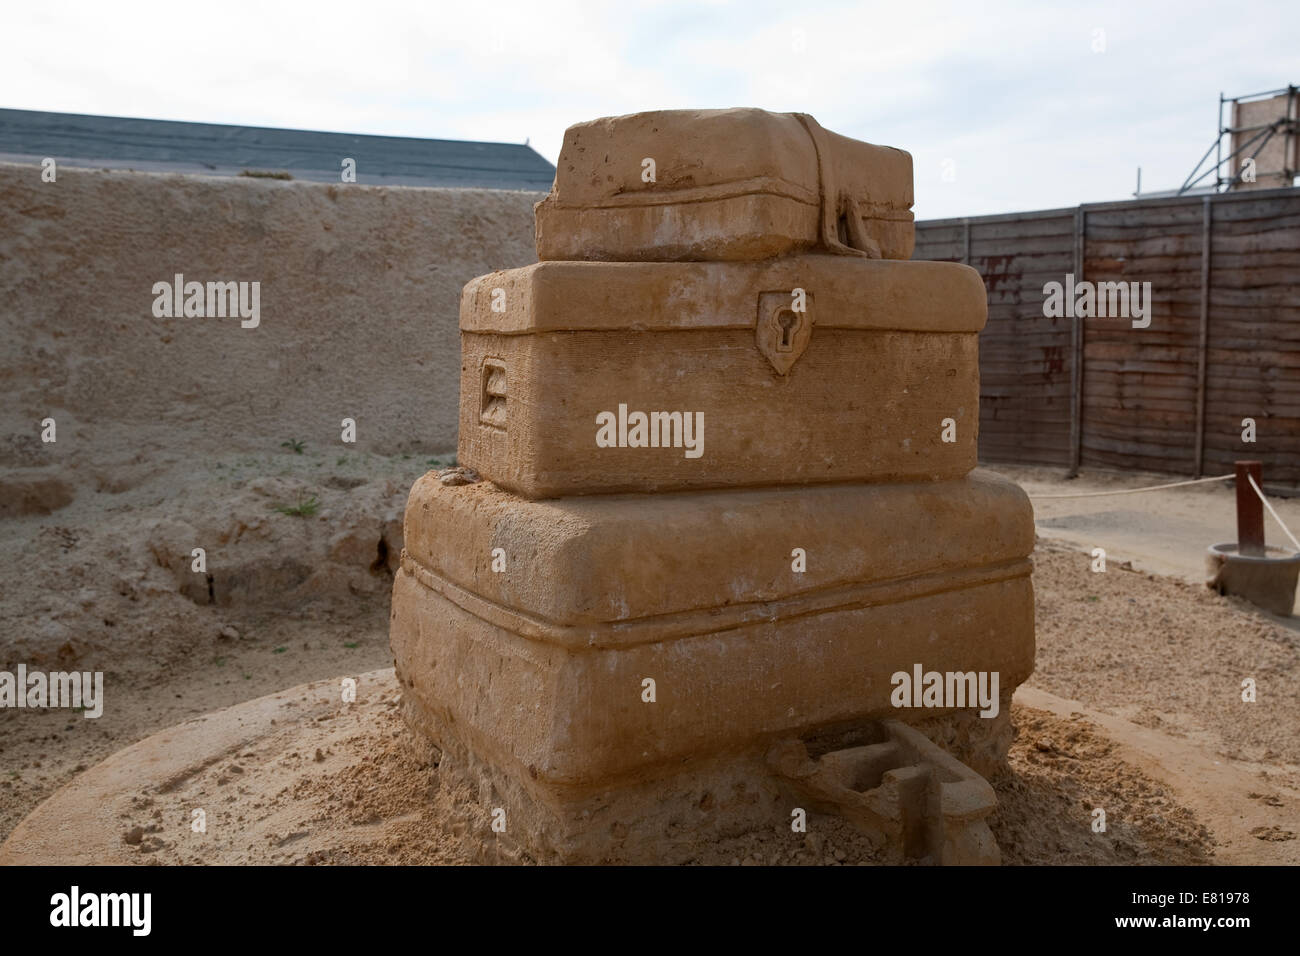 Going on holiday? three suitcases on display at the Sand Sculpture festival in Brighton Stock Photo